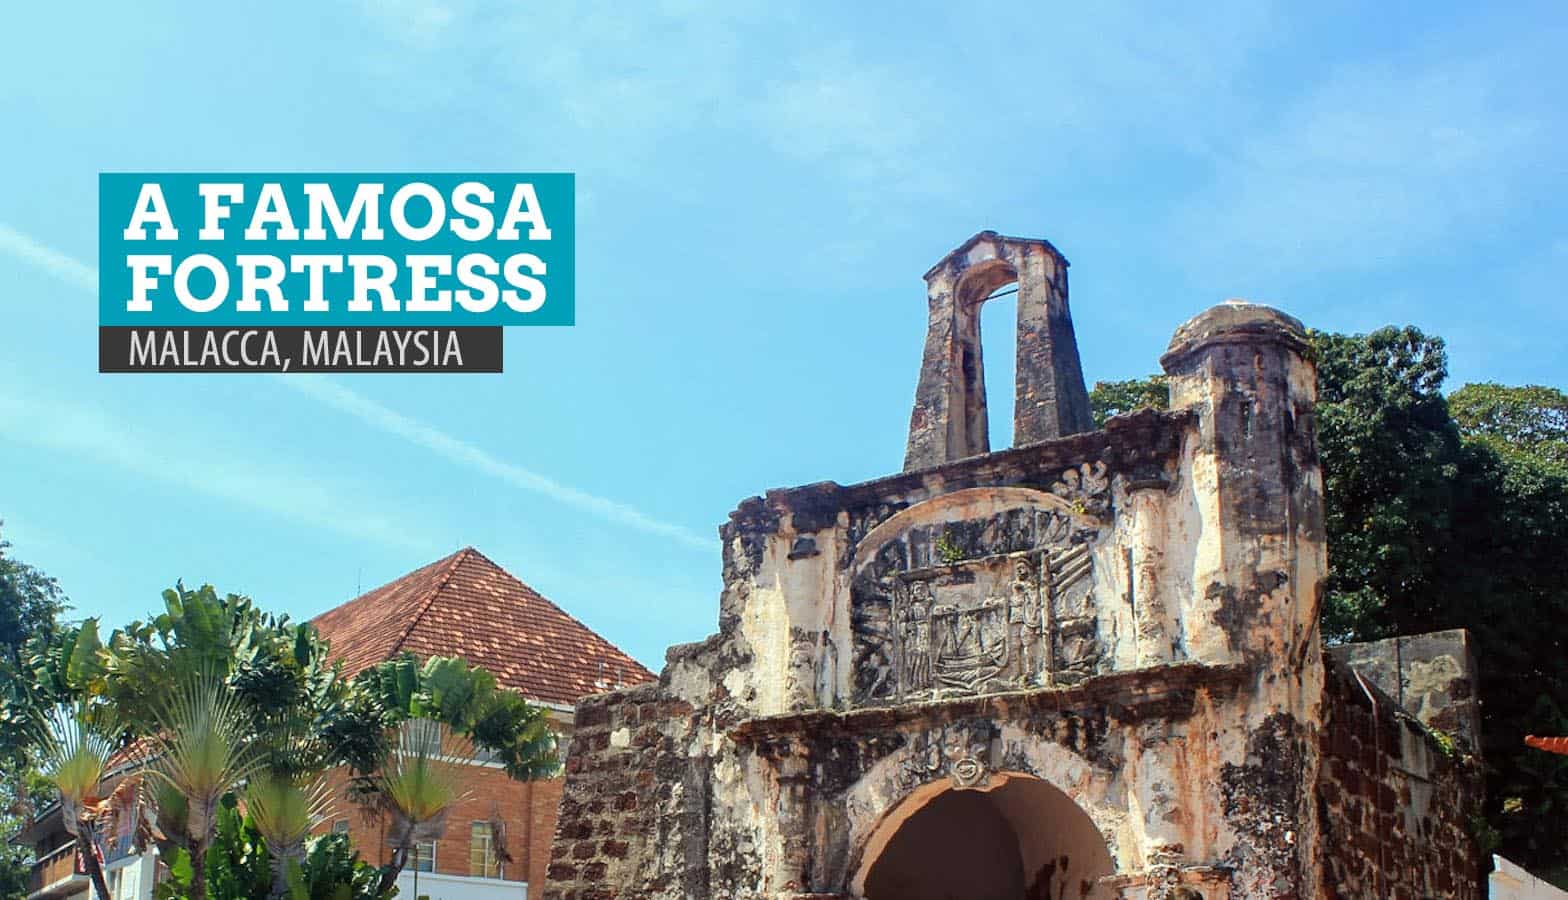 A FAMOSA FORTRESS: Unearthing and Rebuilding Malacca's History | The Poor Traveler Itinerary Blog